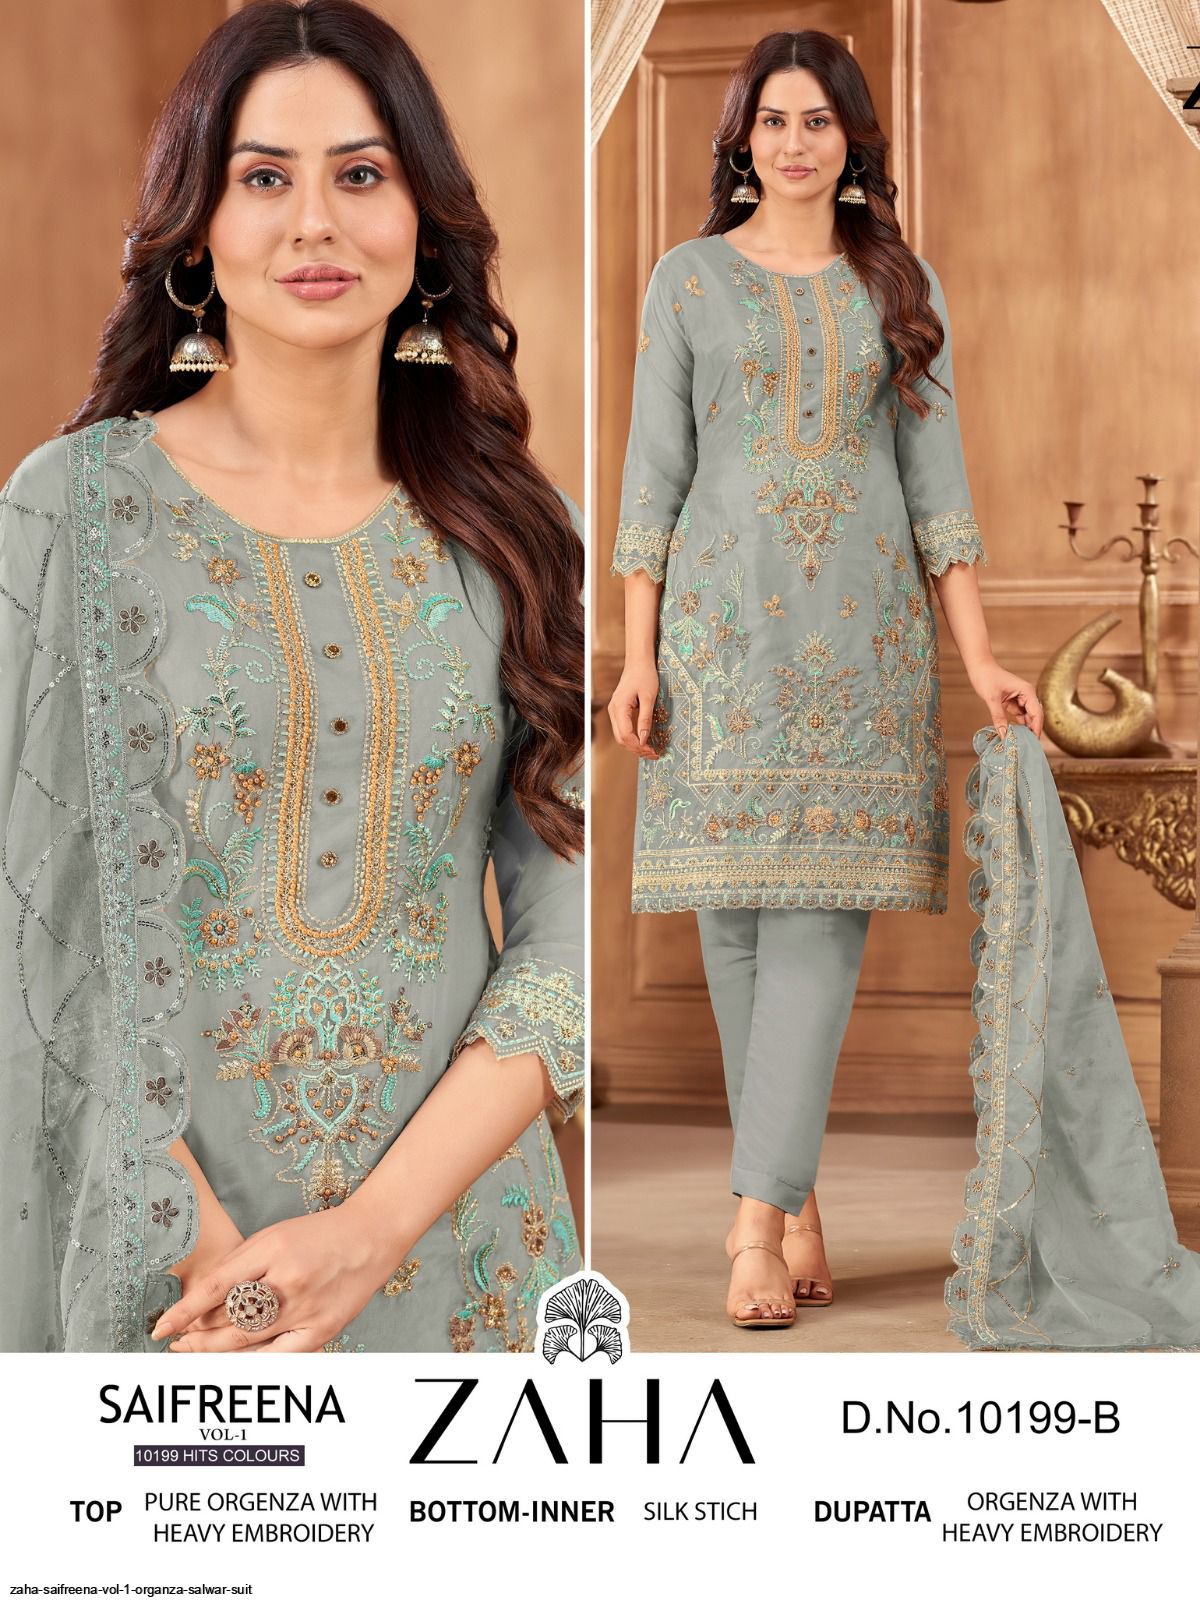 LT NITYA VOL 170 7003 Indian Latest Design Lehenga Style Suit For Women  Green Embroidered Semi Stich Top salwar suit Set with Dupatta SD138-GREEN